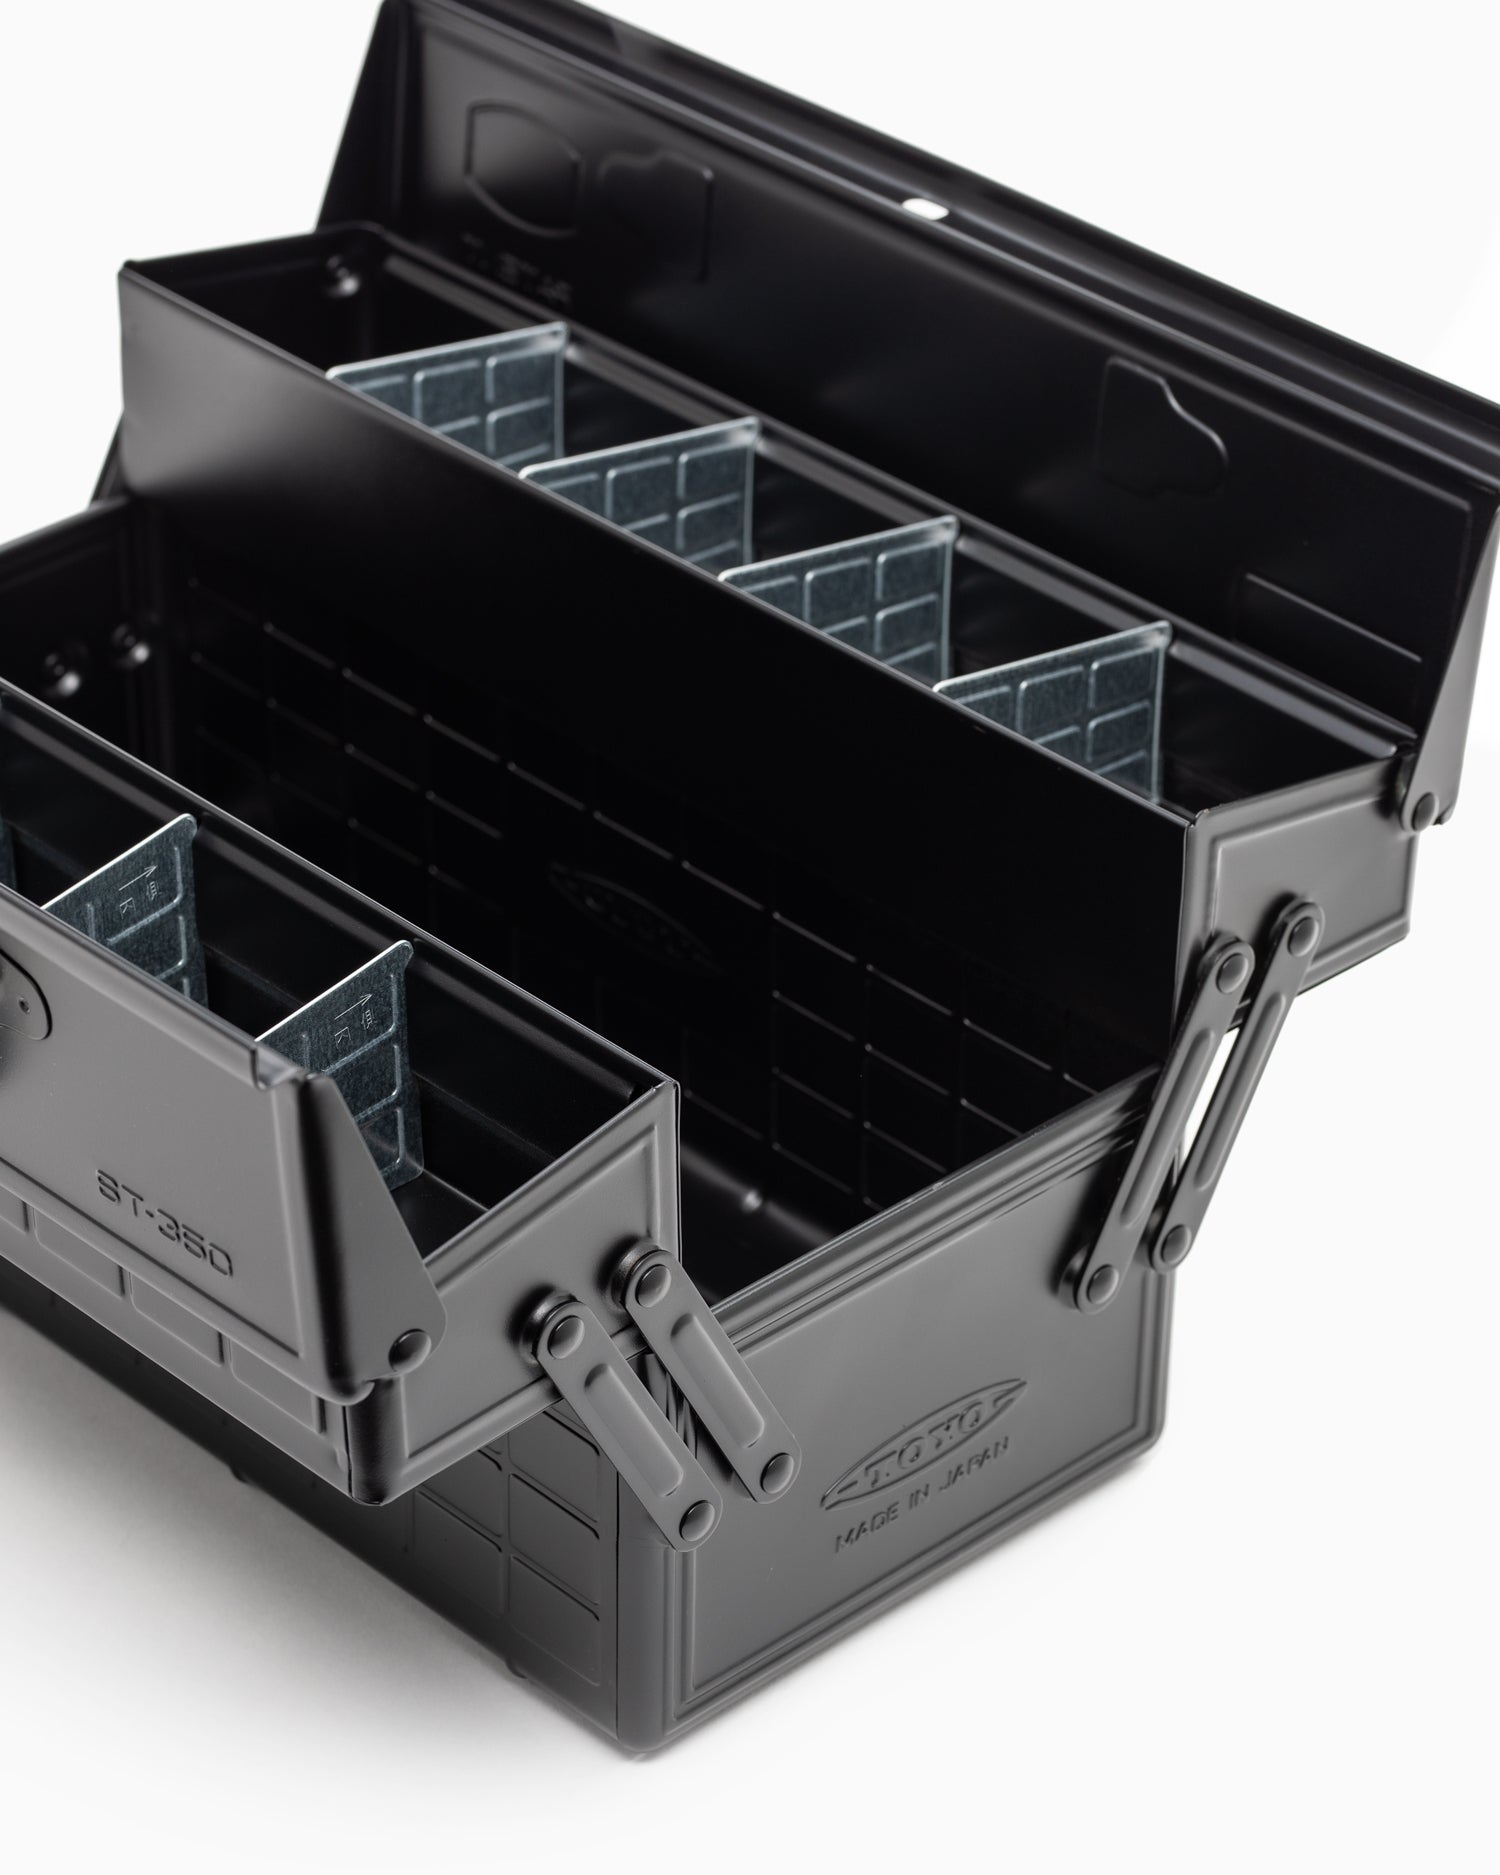 Two Stage ST-350 Toolbox - Black